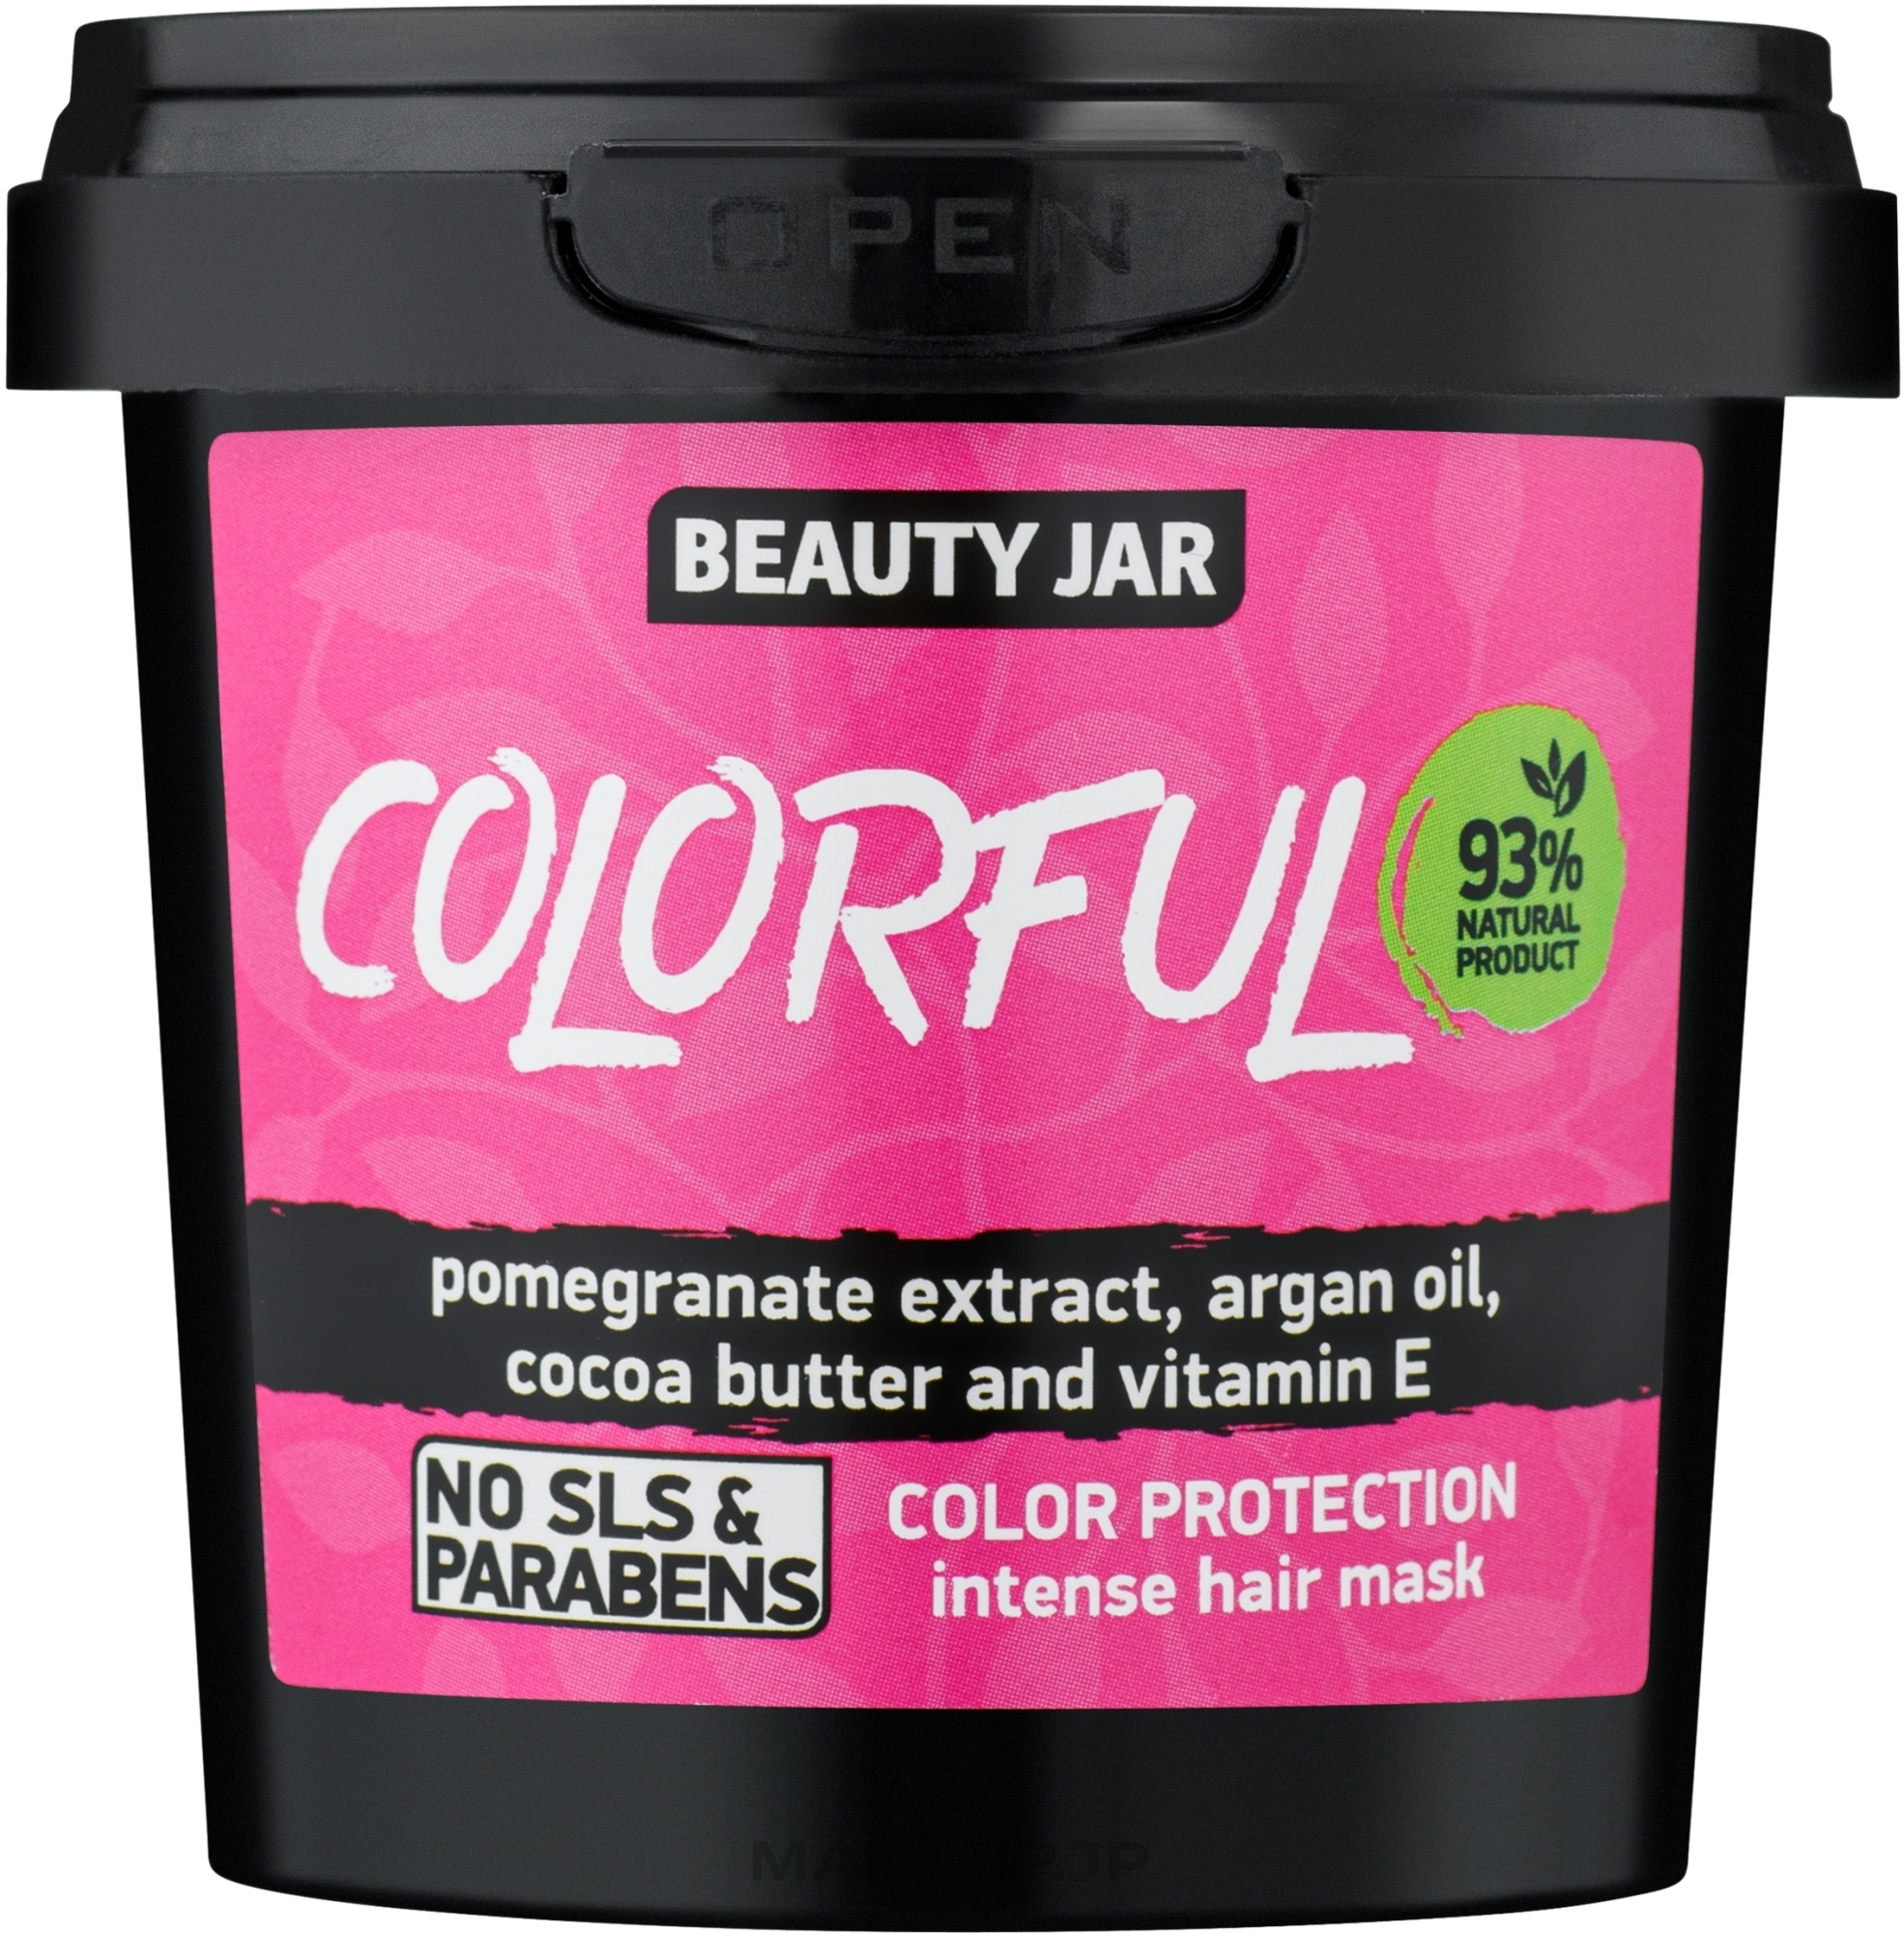 Intensive Colored Hair Mask "Color Preserving" - Beauty Jar Colorful Intense Hair Mask — photo 140 g